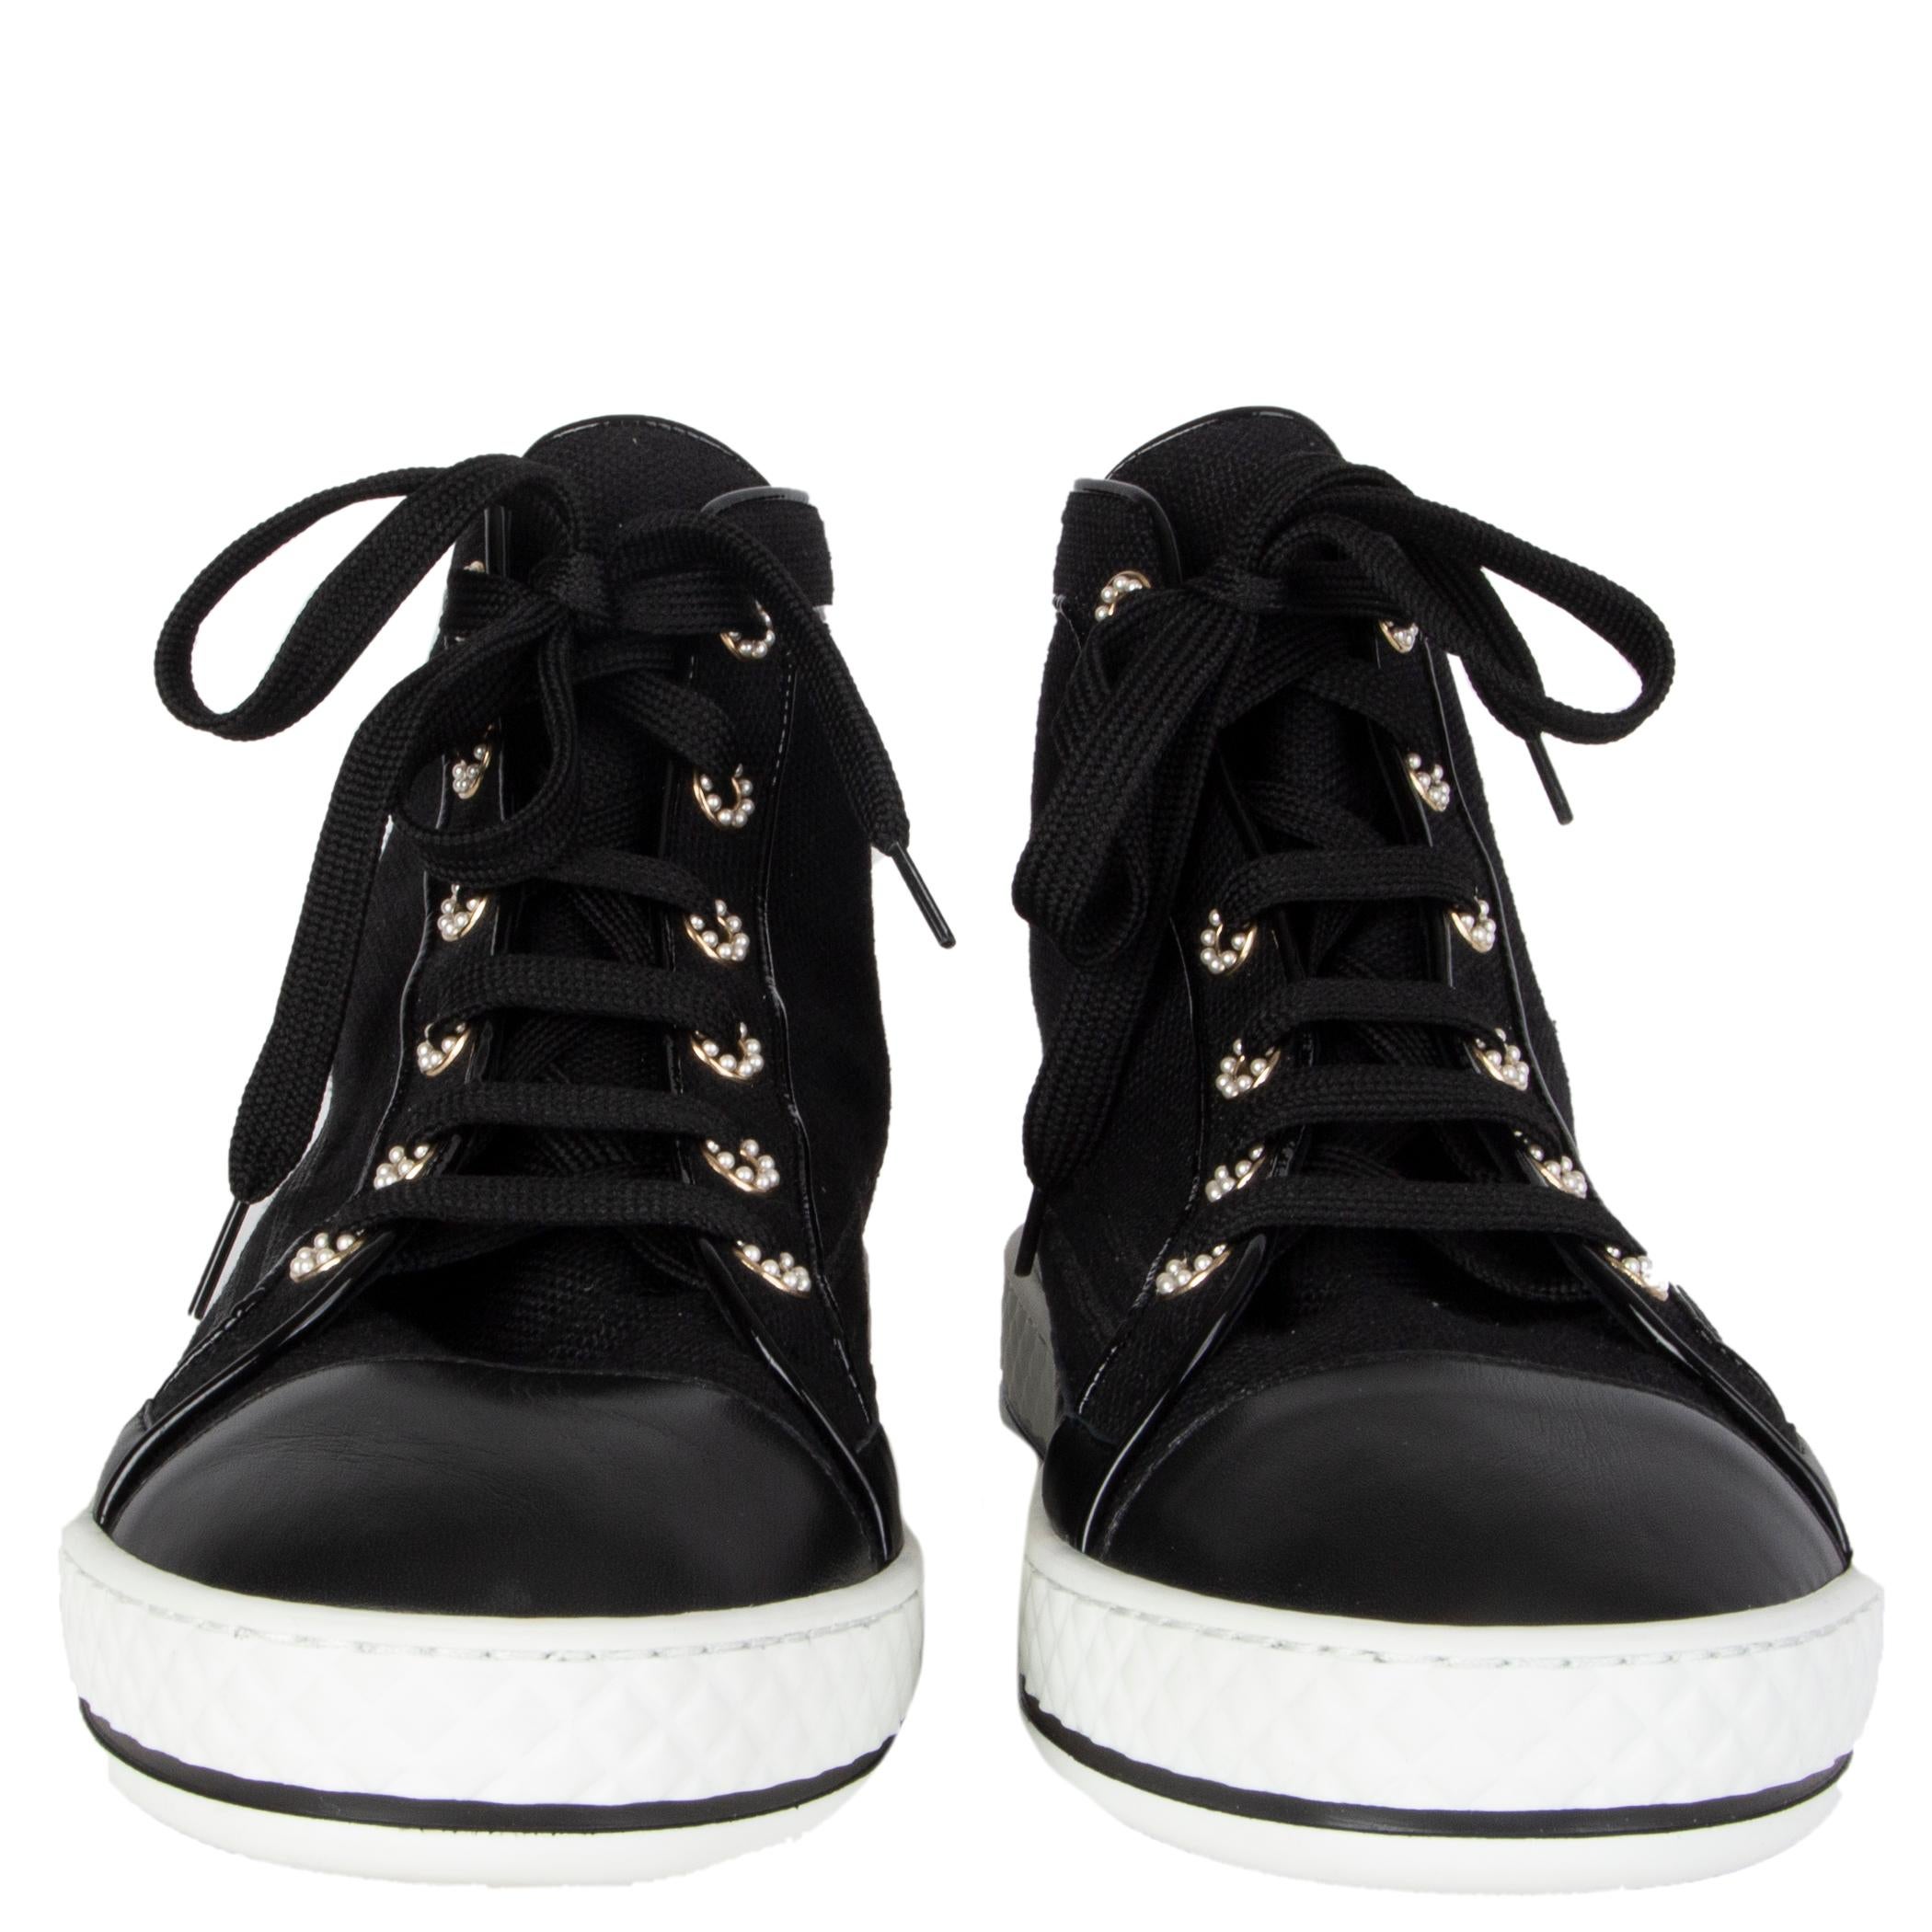 100% authentic Chanel high-top sneakers in black canvas and calfskin featuring pearl eyelets and a white rubber sole. Brand new. Come with dust bag. 

Measurements
Imprinted Size	40
Shoe Size	40
Inside Sole	26cm (10.1in)
Width	8cm